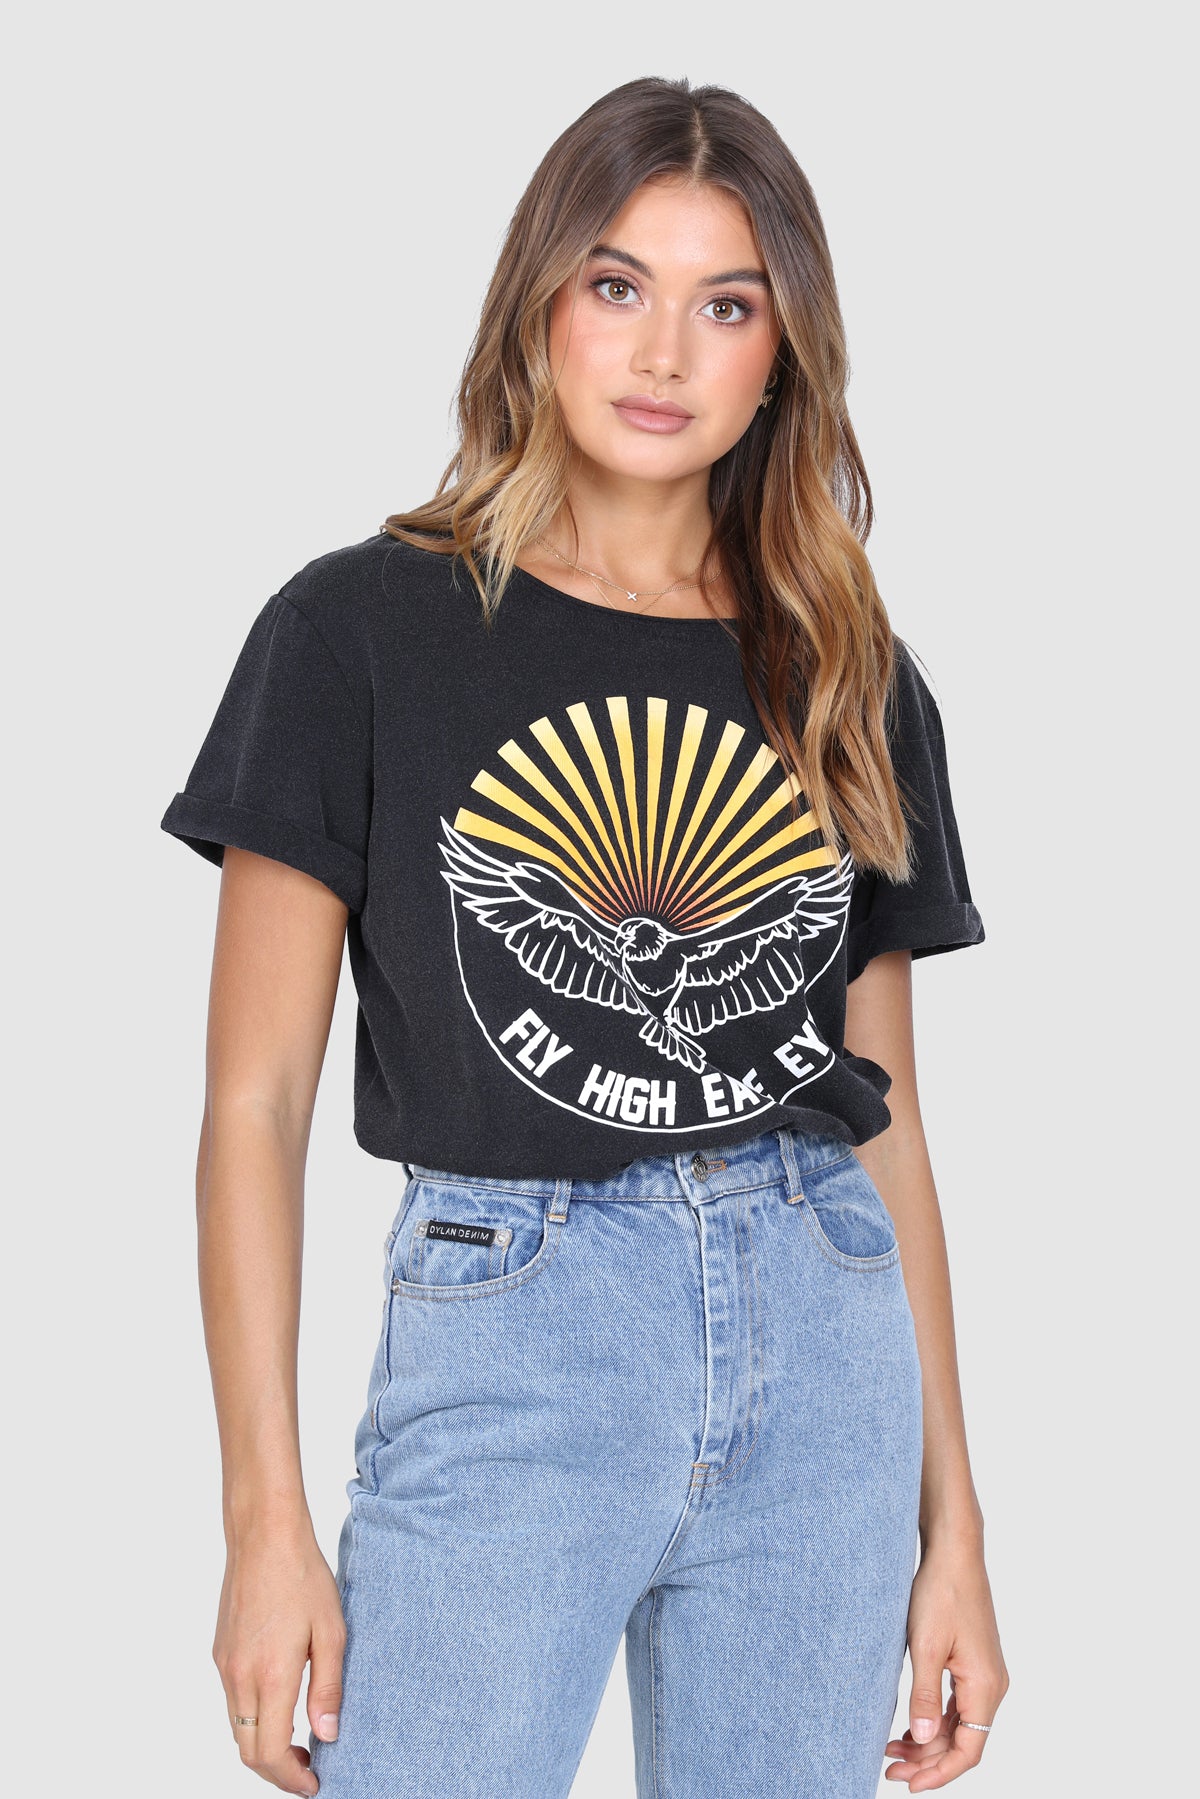 Bailage Curled Haired Caucasian female wearing Vintage  Cotton Casual  Graphic Tee  Short Sleeved T-Shirt  Relaxed Fit  Round Neck  70's vibe paired with high waisted light washed denim jeans and white converse 